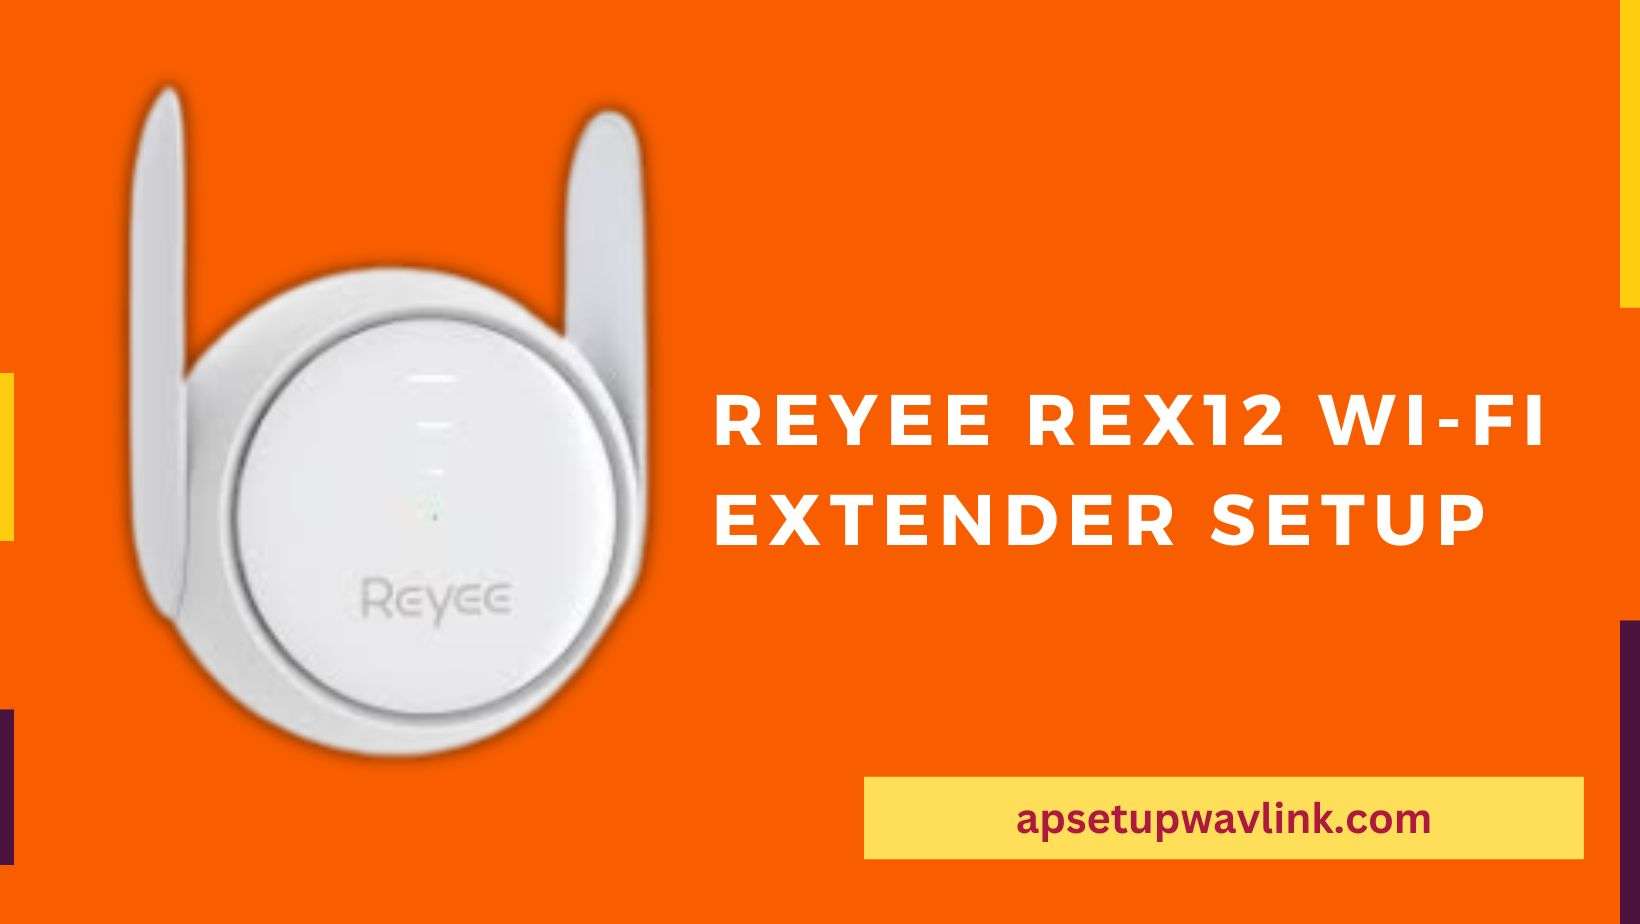 You are currently viewing Reyee REX12 Wi-Fi Extender Setup